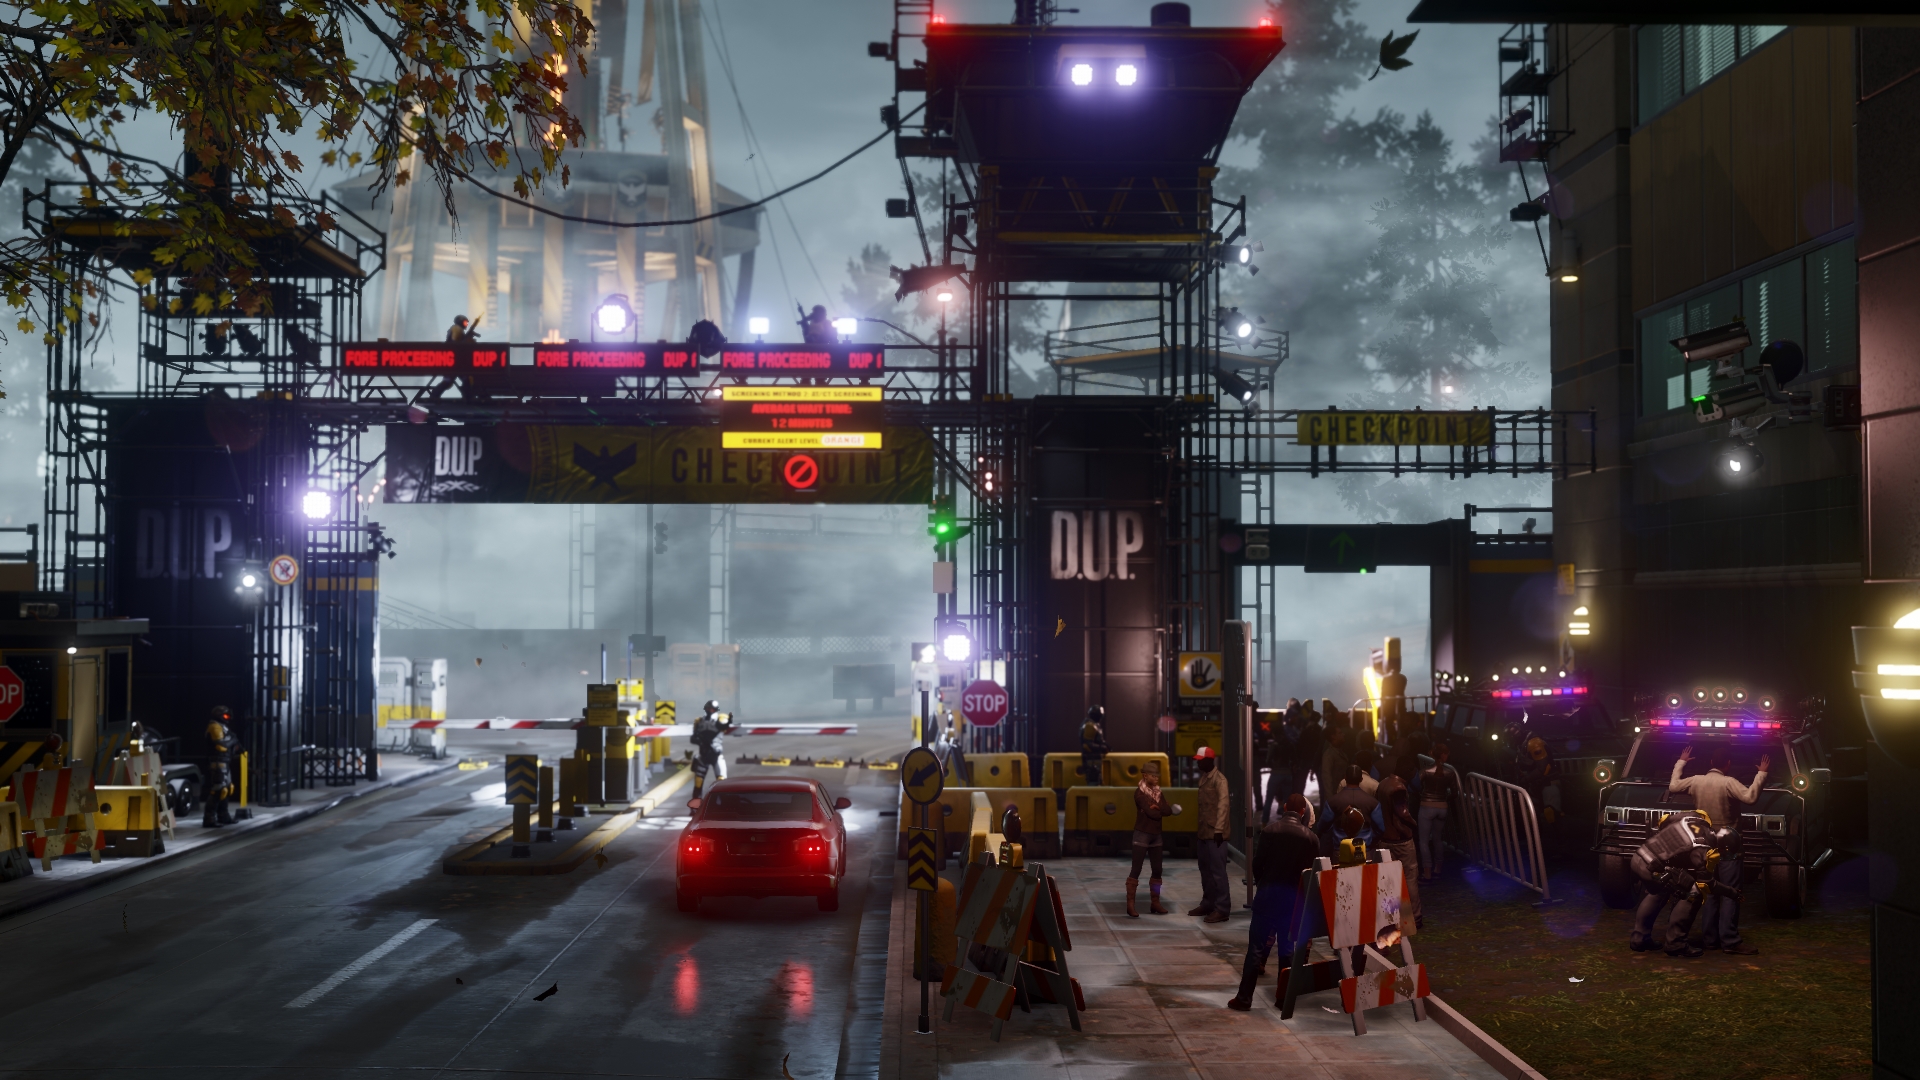 inFamous: Second Son (PS4)